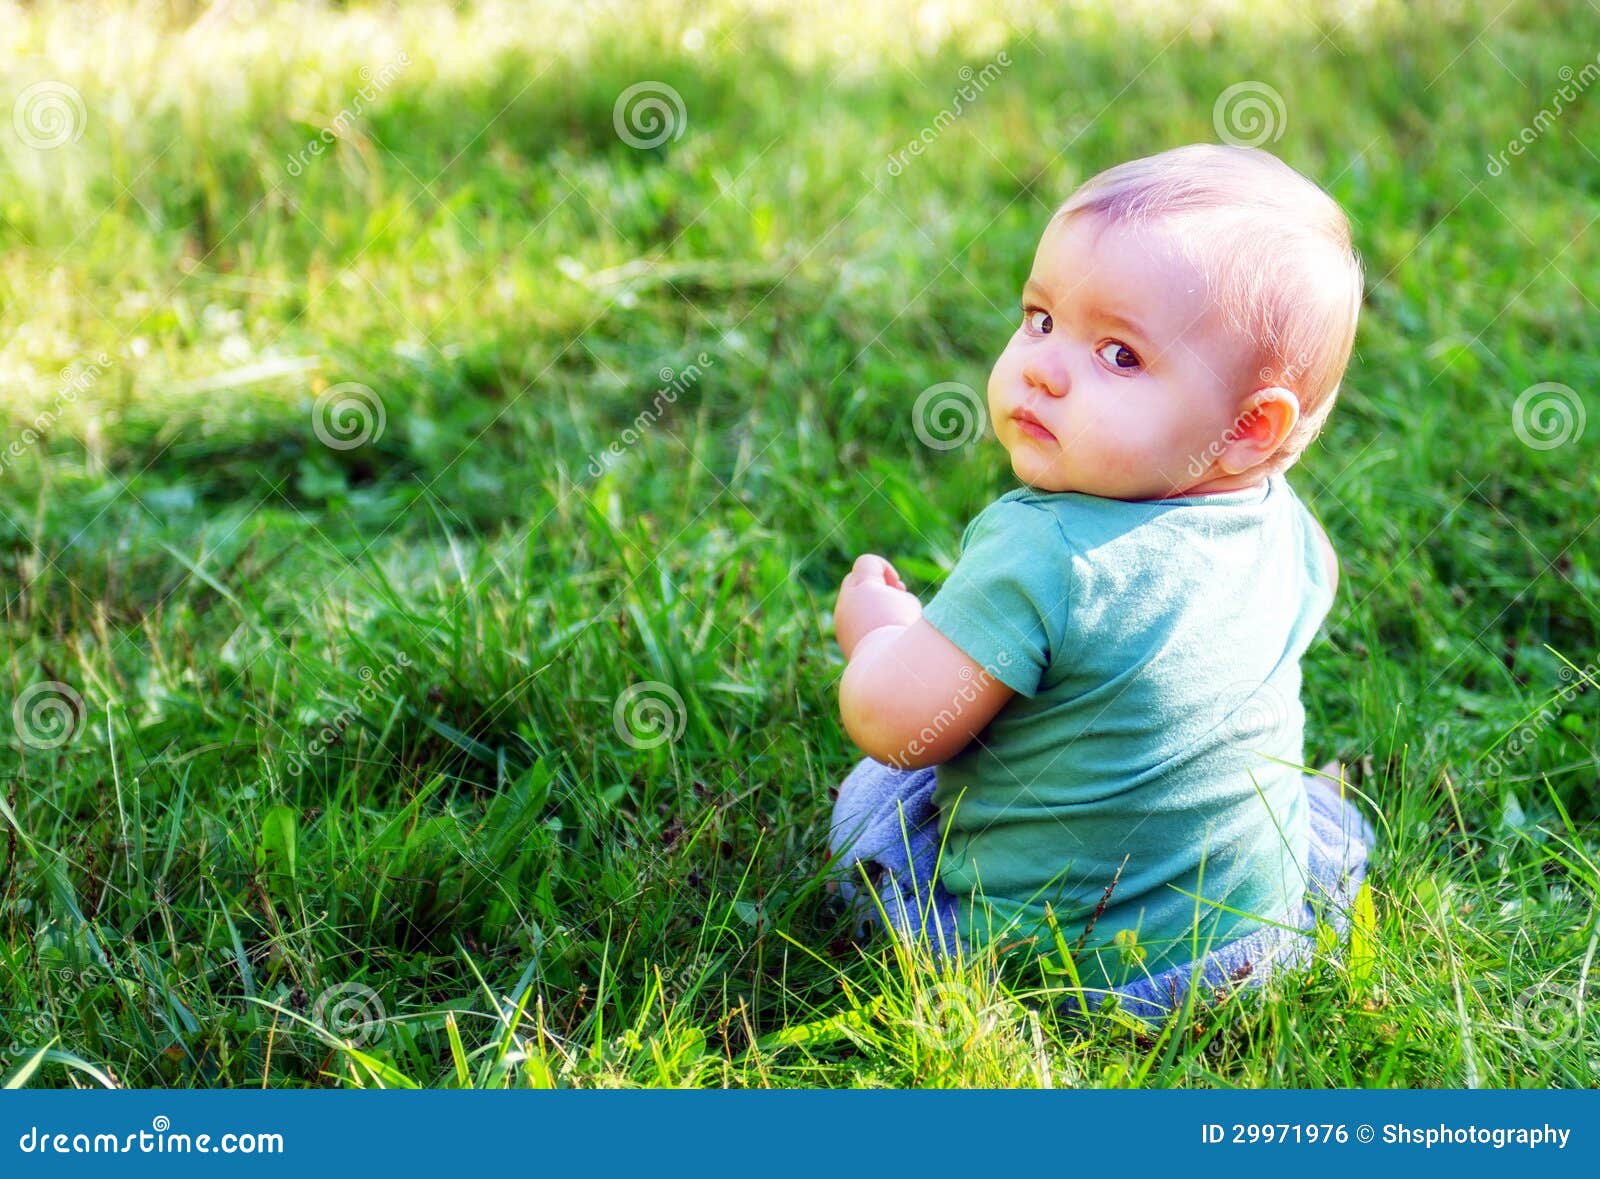 Download Looking Back stock photo. Image of outside, child, back - 29971976